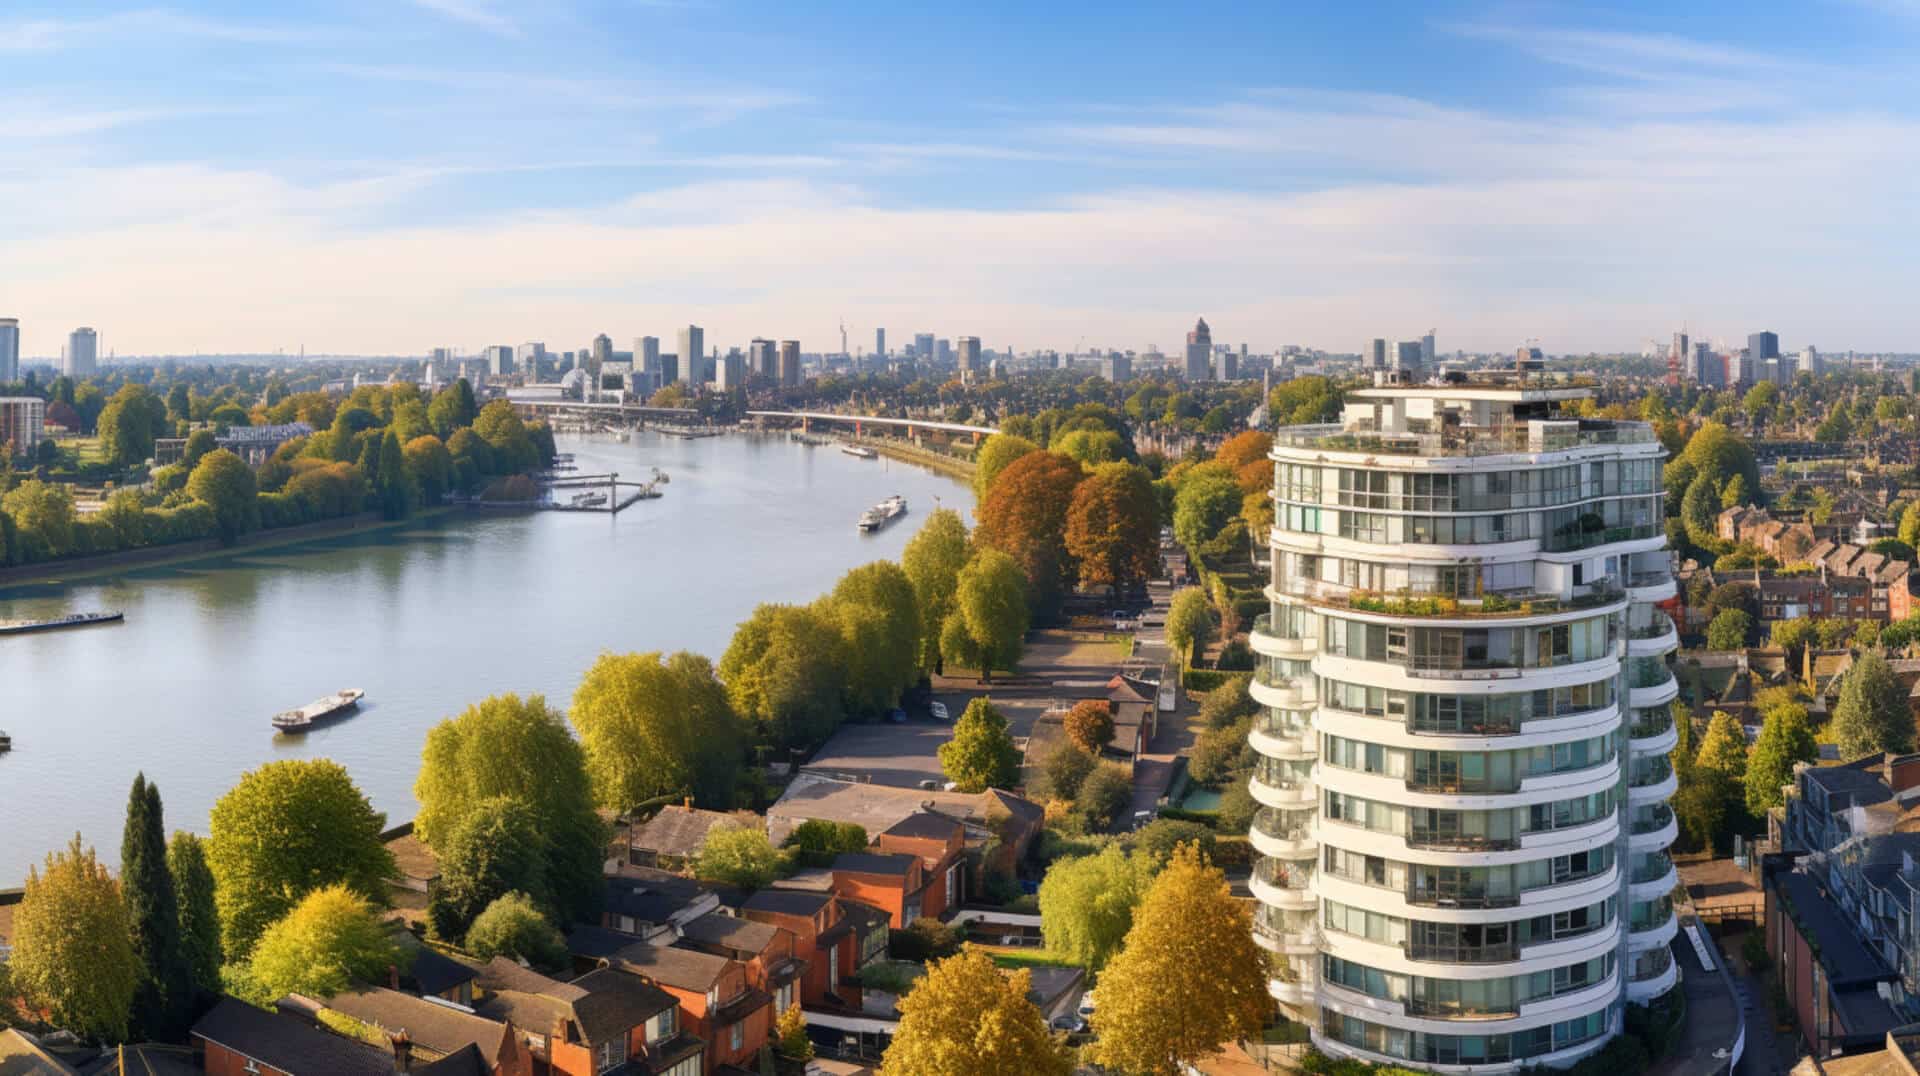 001 putney london flats pros and cons panoramic skyline view 0 0